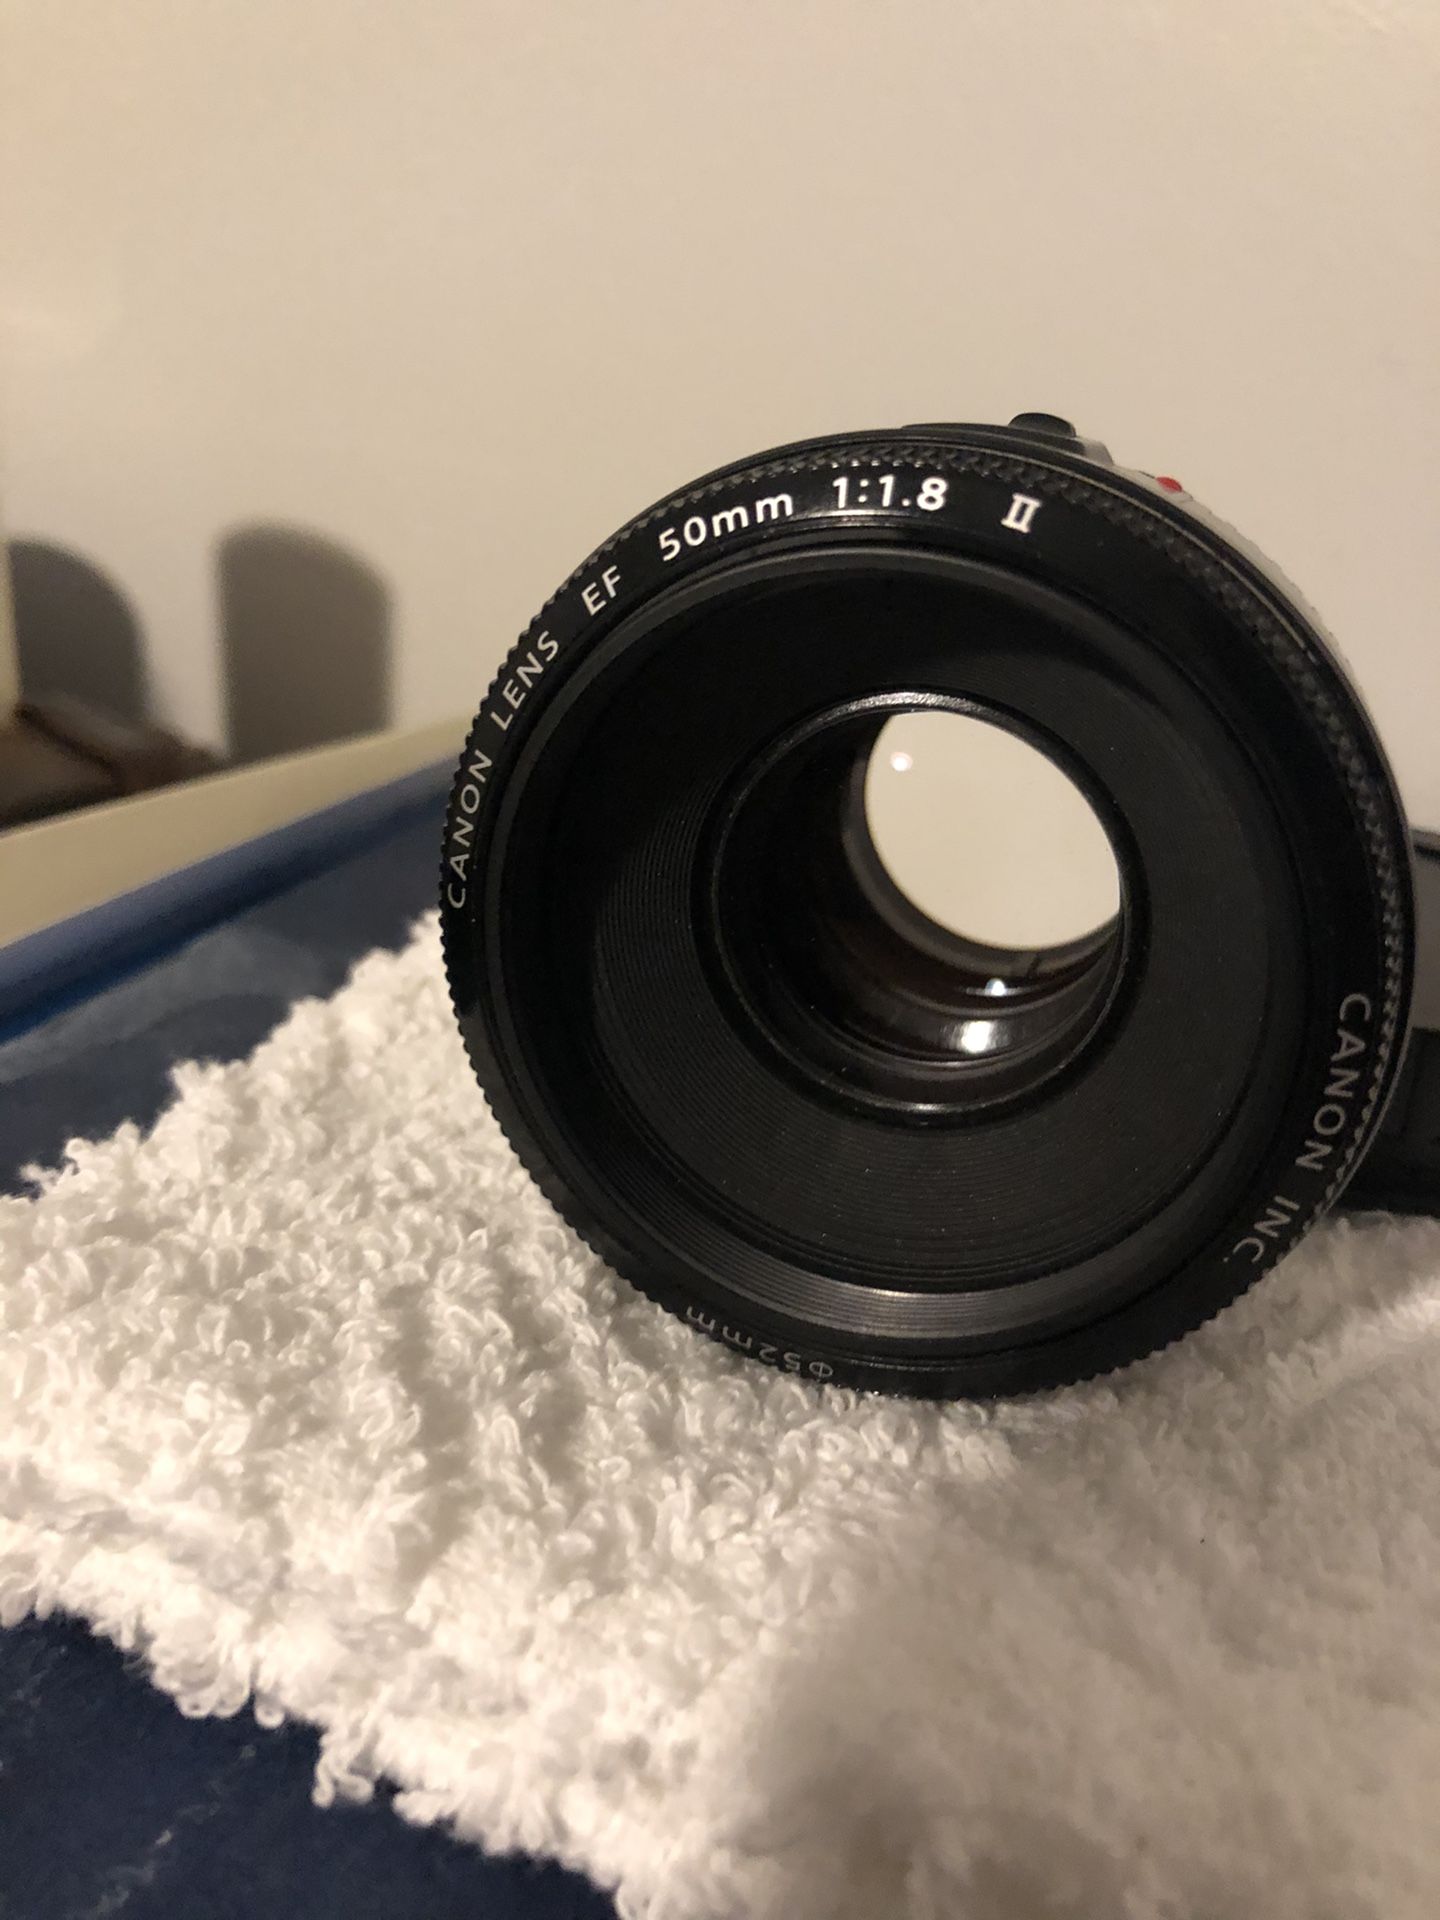 Canon EF 50mm 1.8 mkII lens